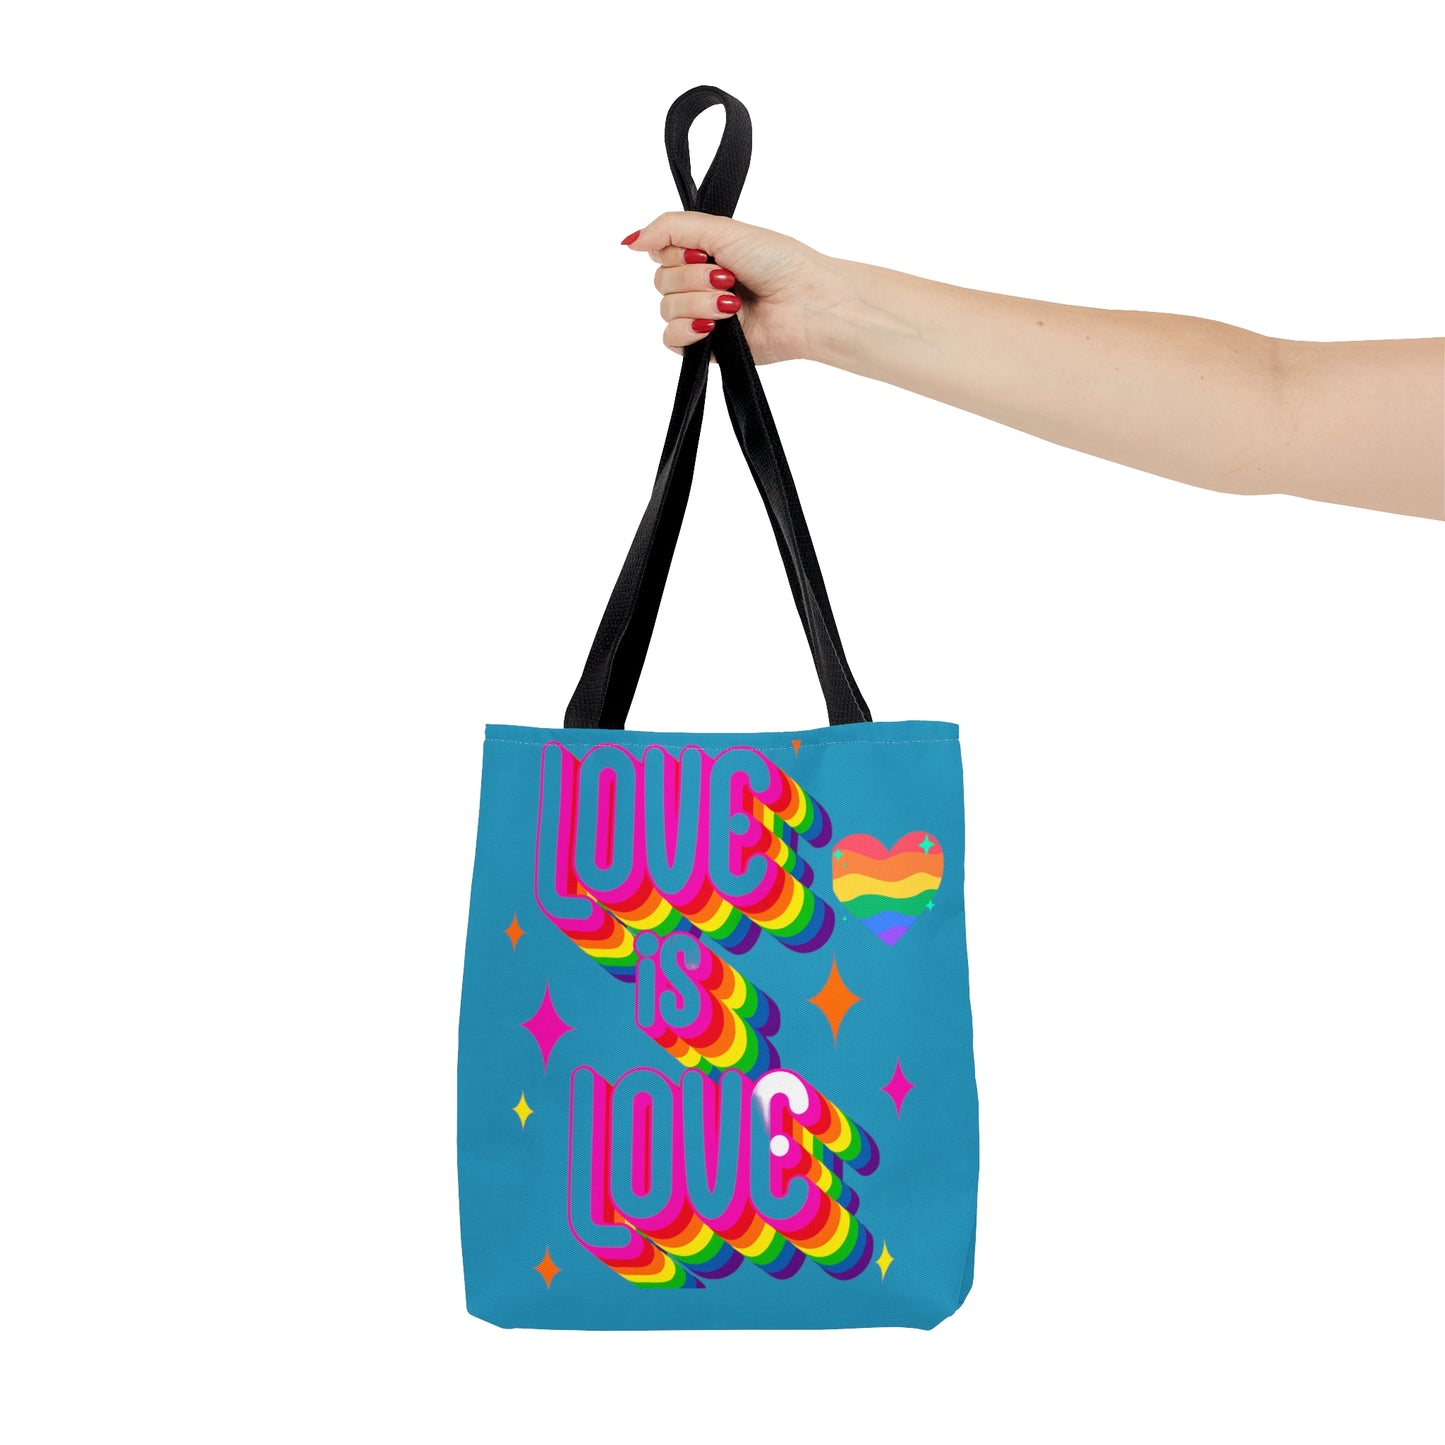 LOVE IS LOVE, full stop. Celebrate it with this colorful Tote Bag in 3 sizes to meet your needs.